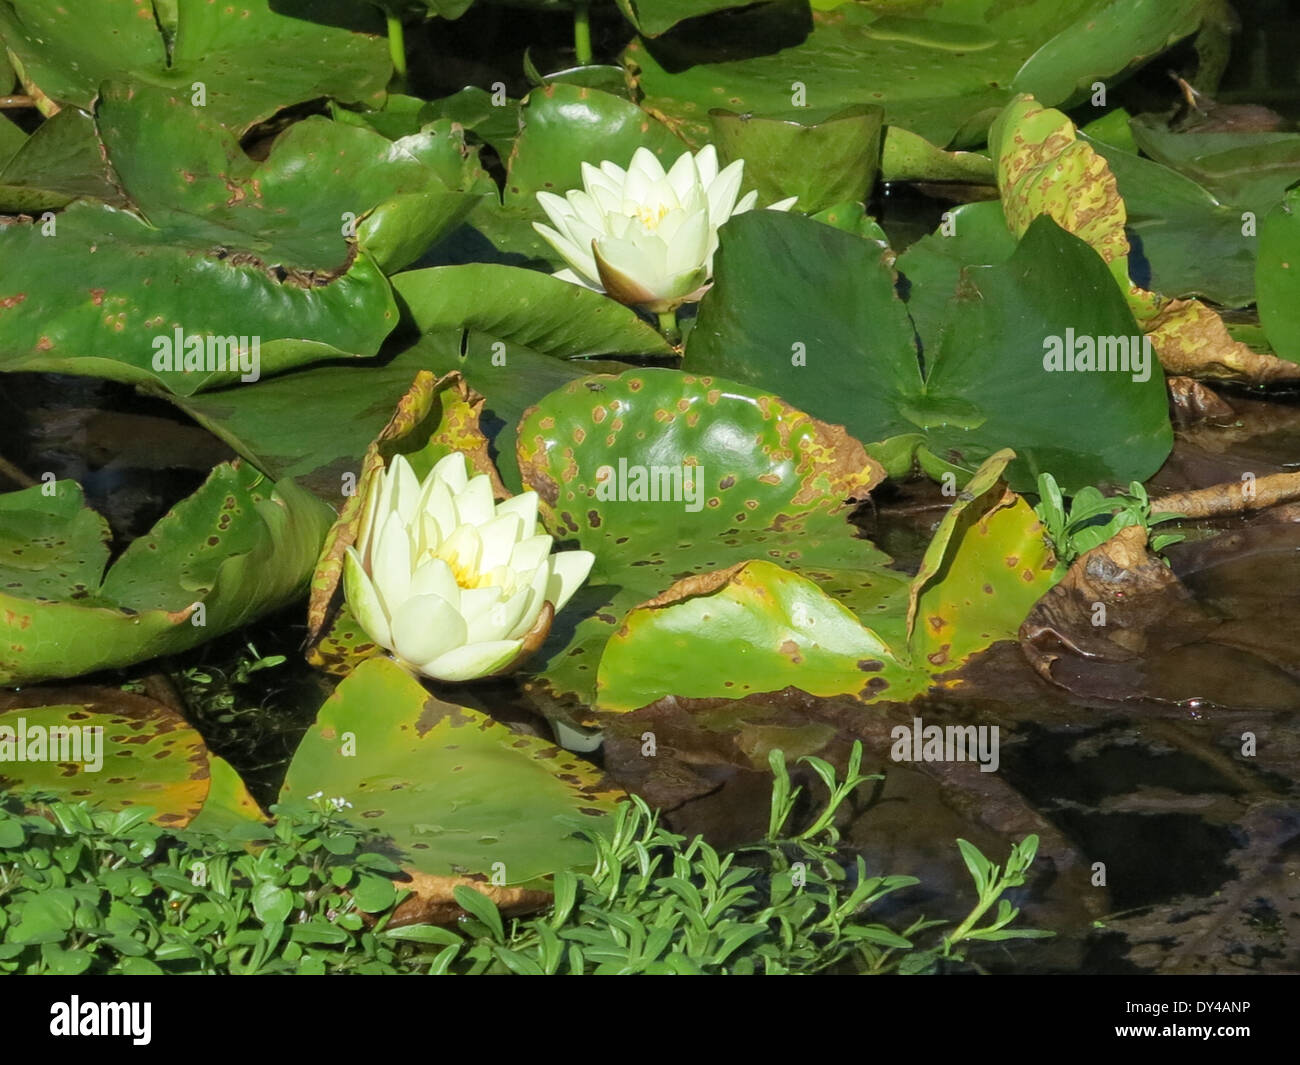 Two flowering water lilies in a pond Stock Photo